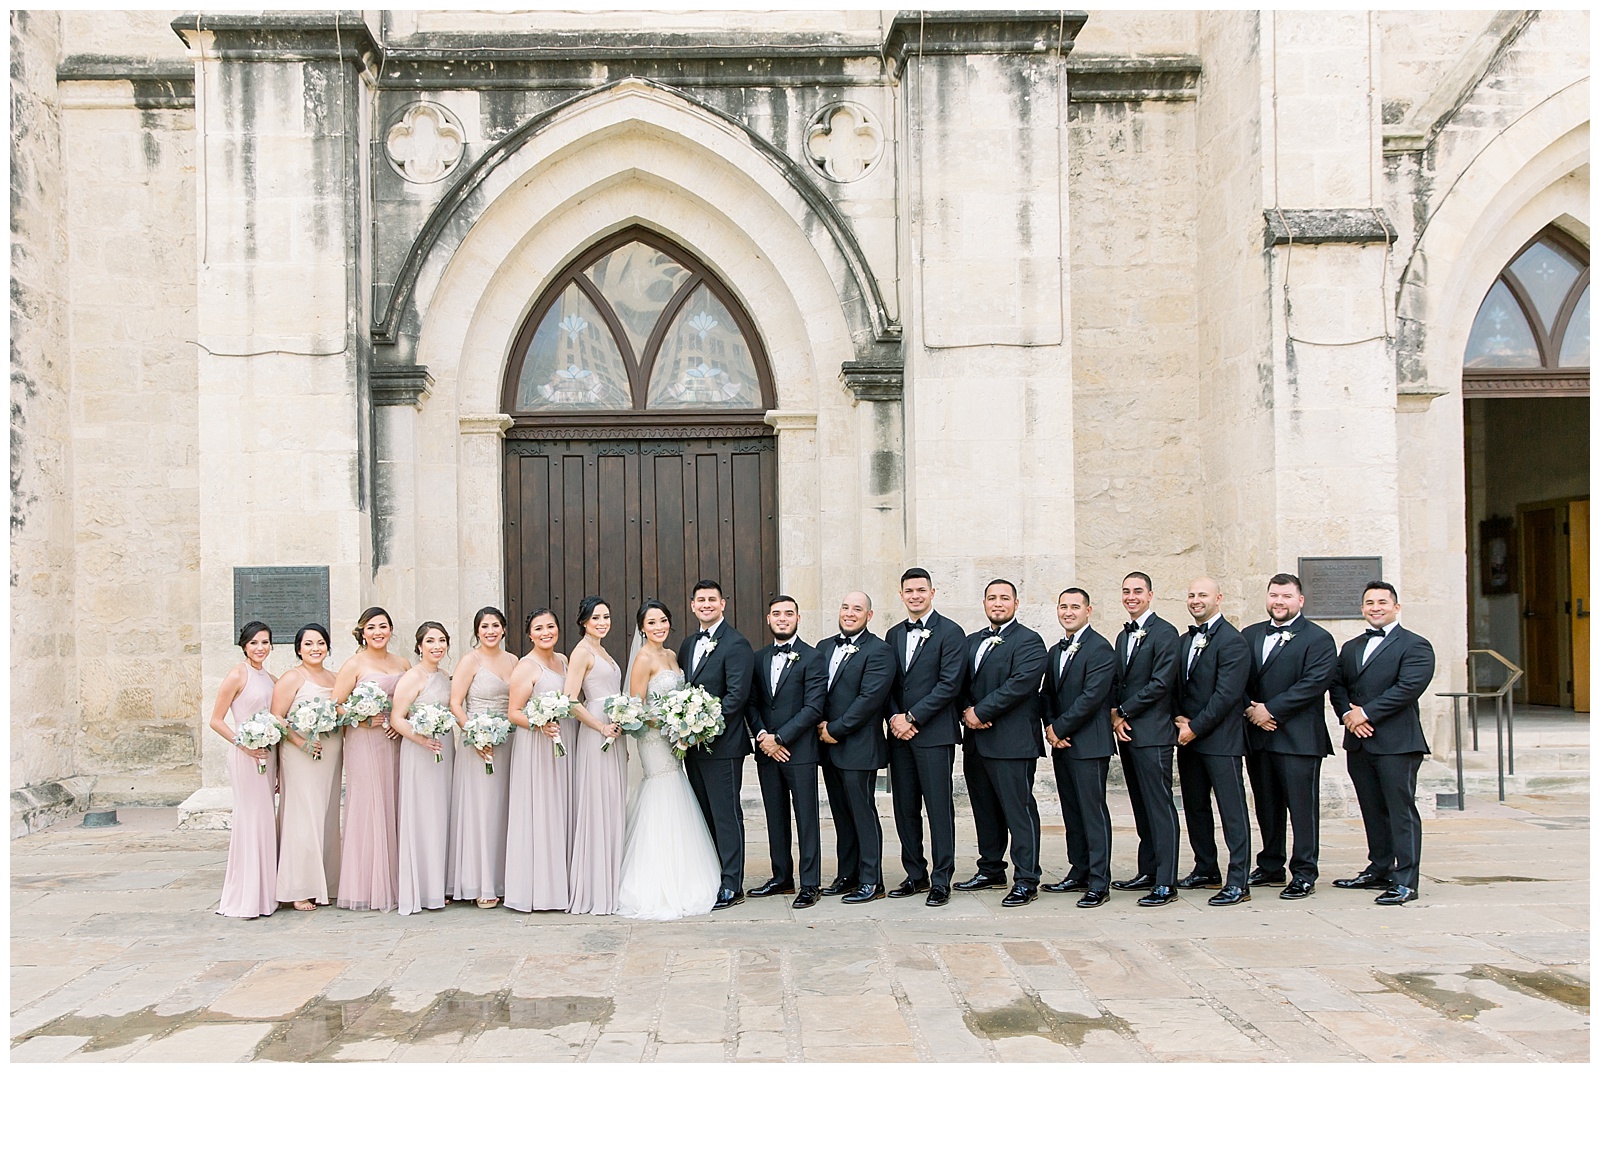 Large bridal party photo for A San Fernando Cathedral Wedding in San Antonio, TX | Monica Roberts Photography | www.monicaroberts.com | San Antonio Wedding Photographer